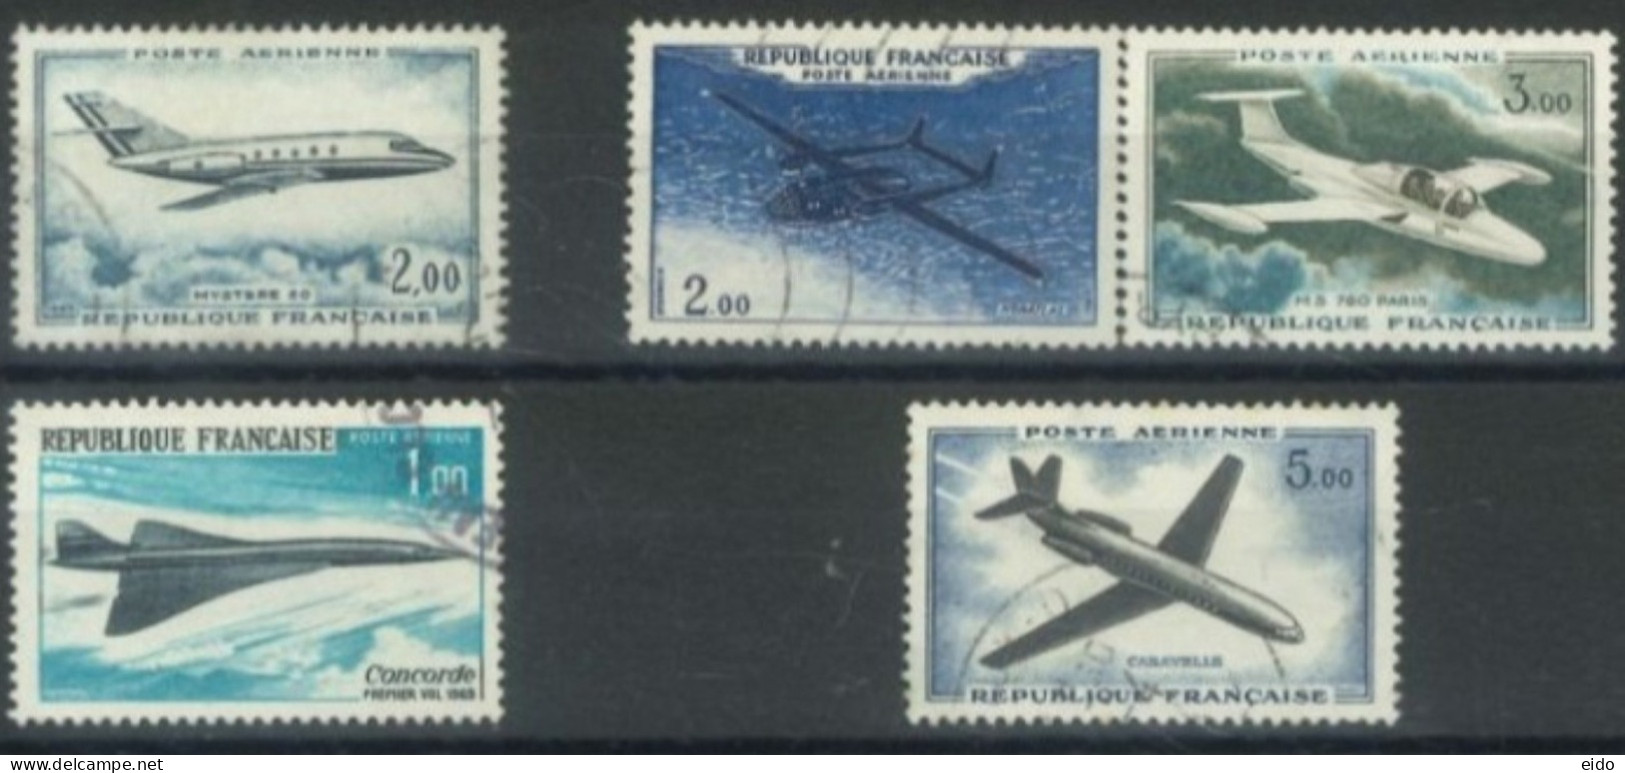 FRANCE - 1960/69 - AIR PLANES STAMPS SET OF 5, USED - Used Stamps